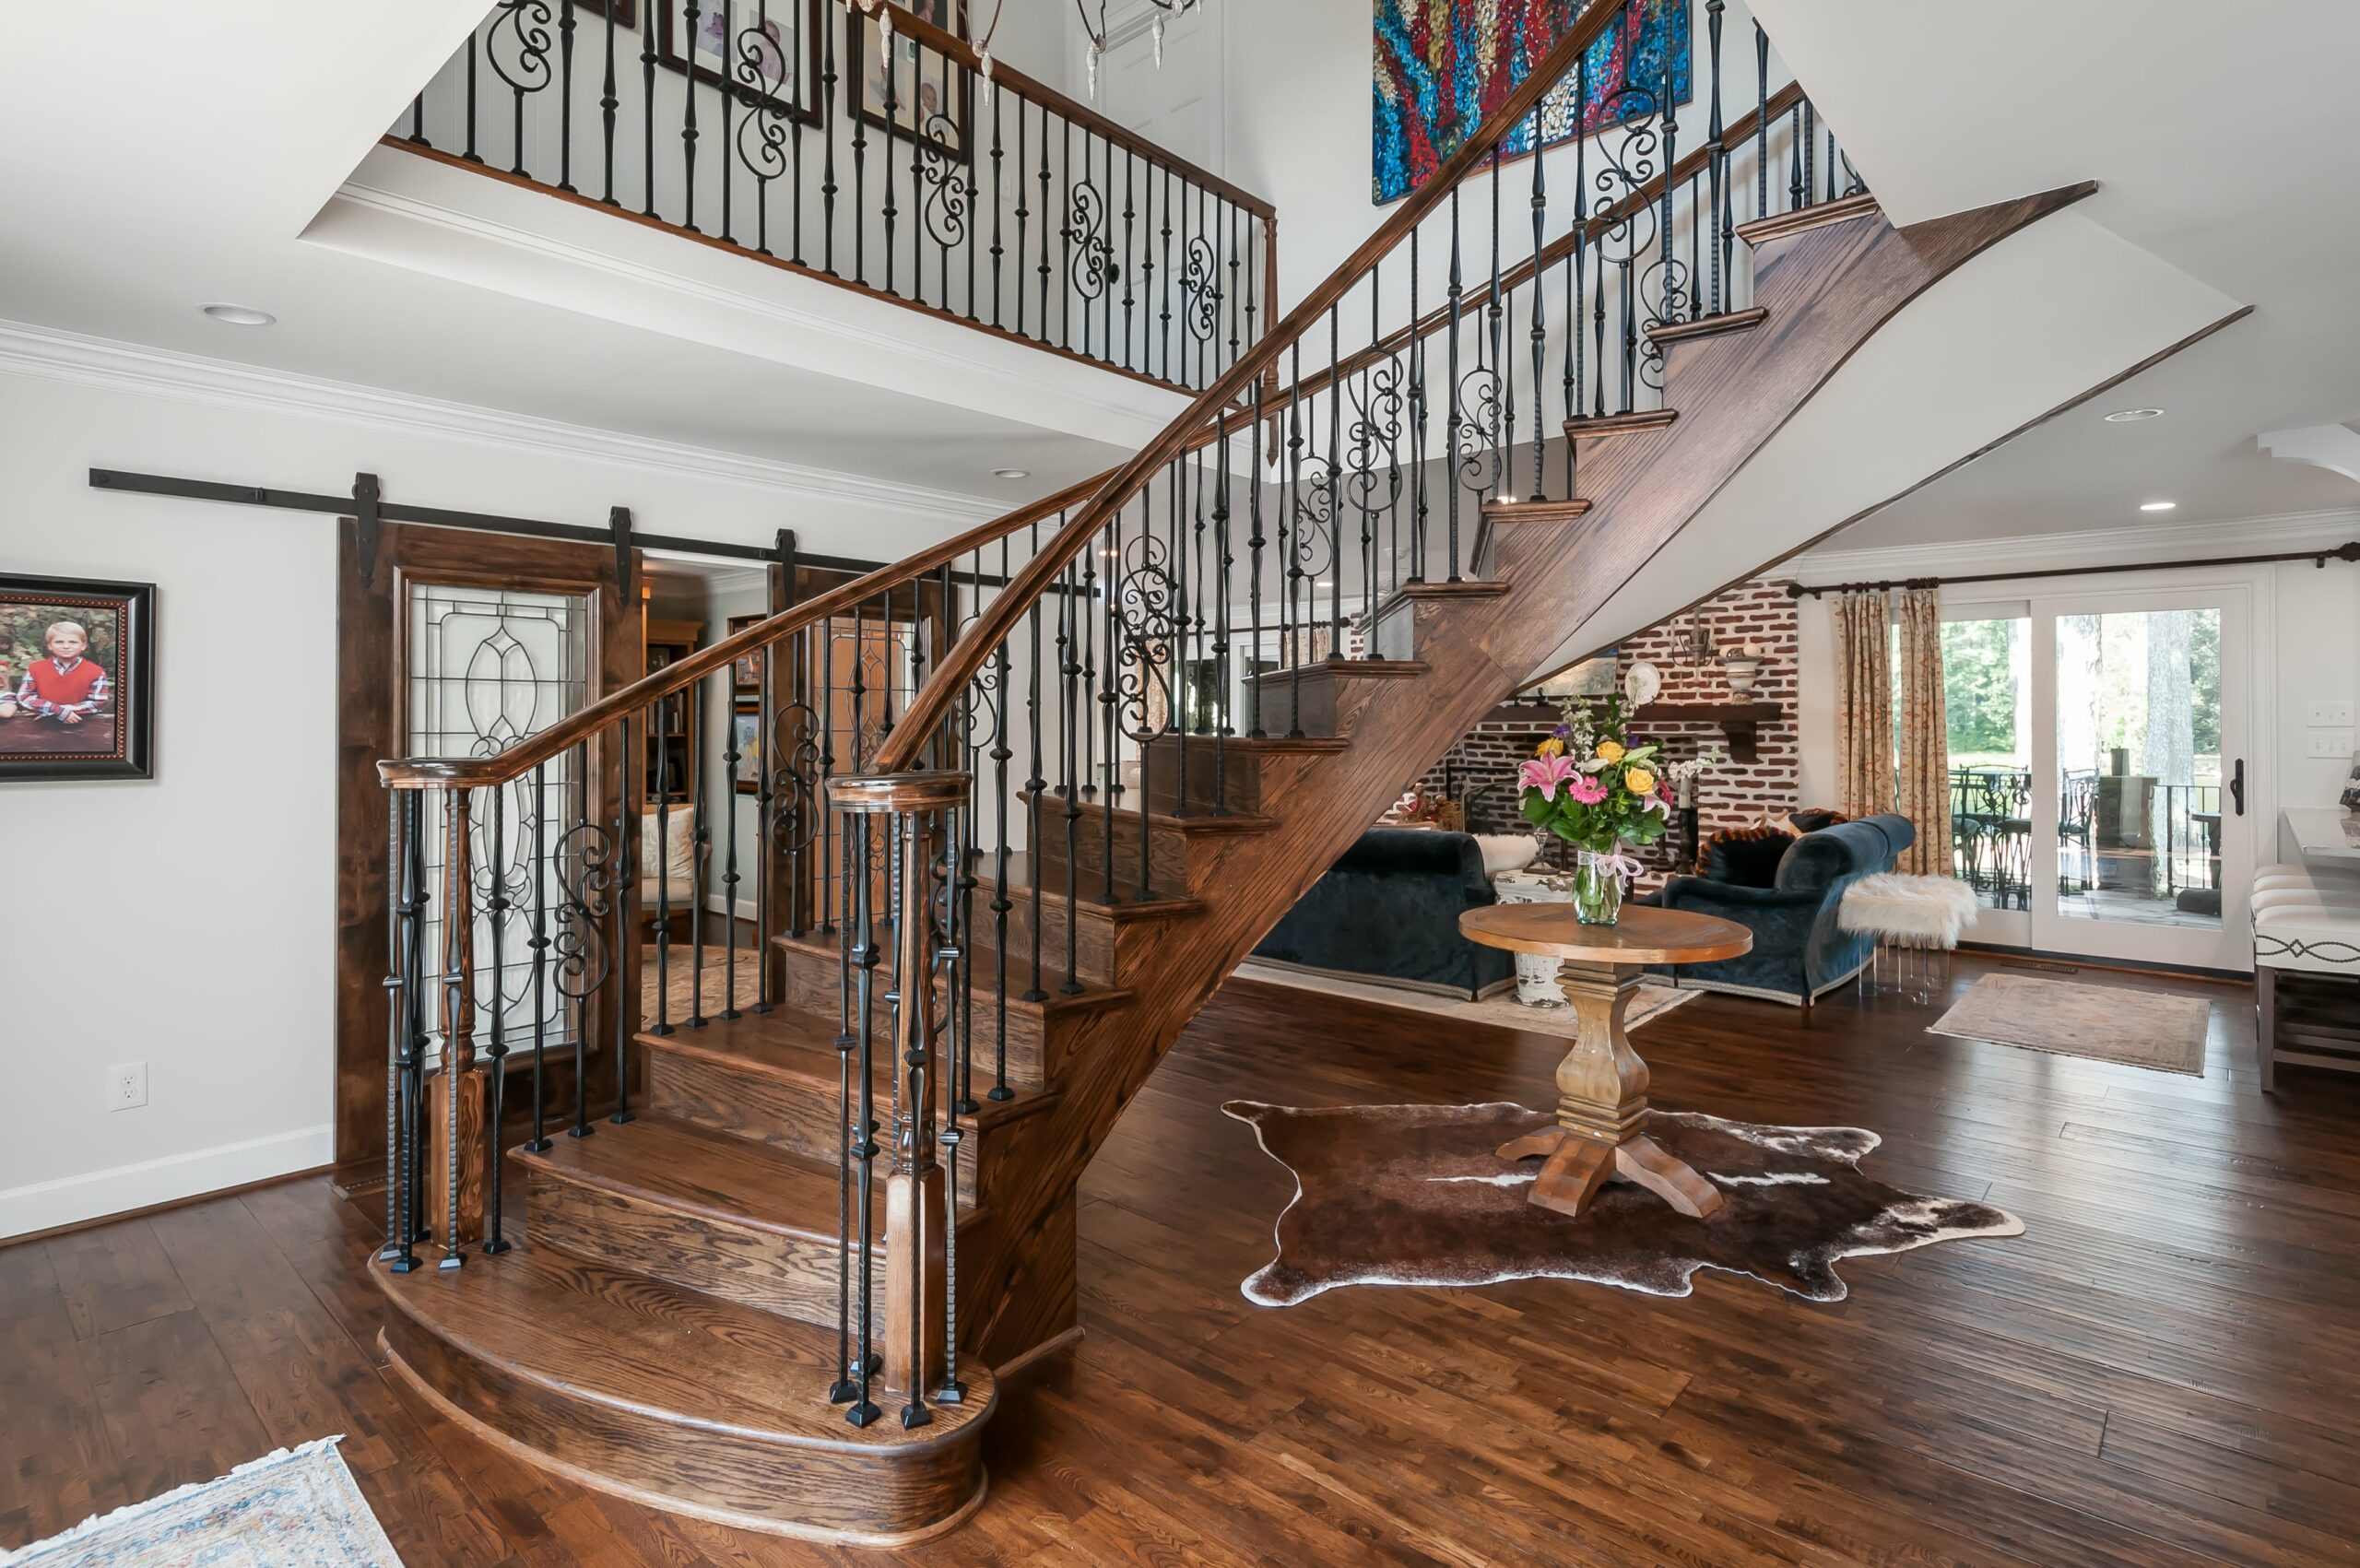 French style wooden spiral staircase in entry way of home